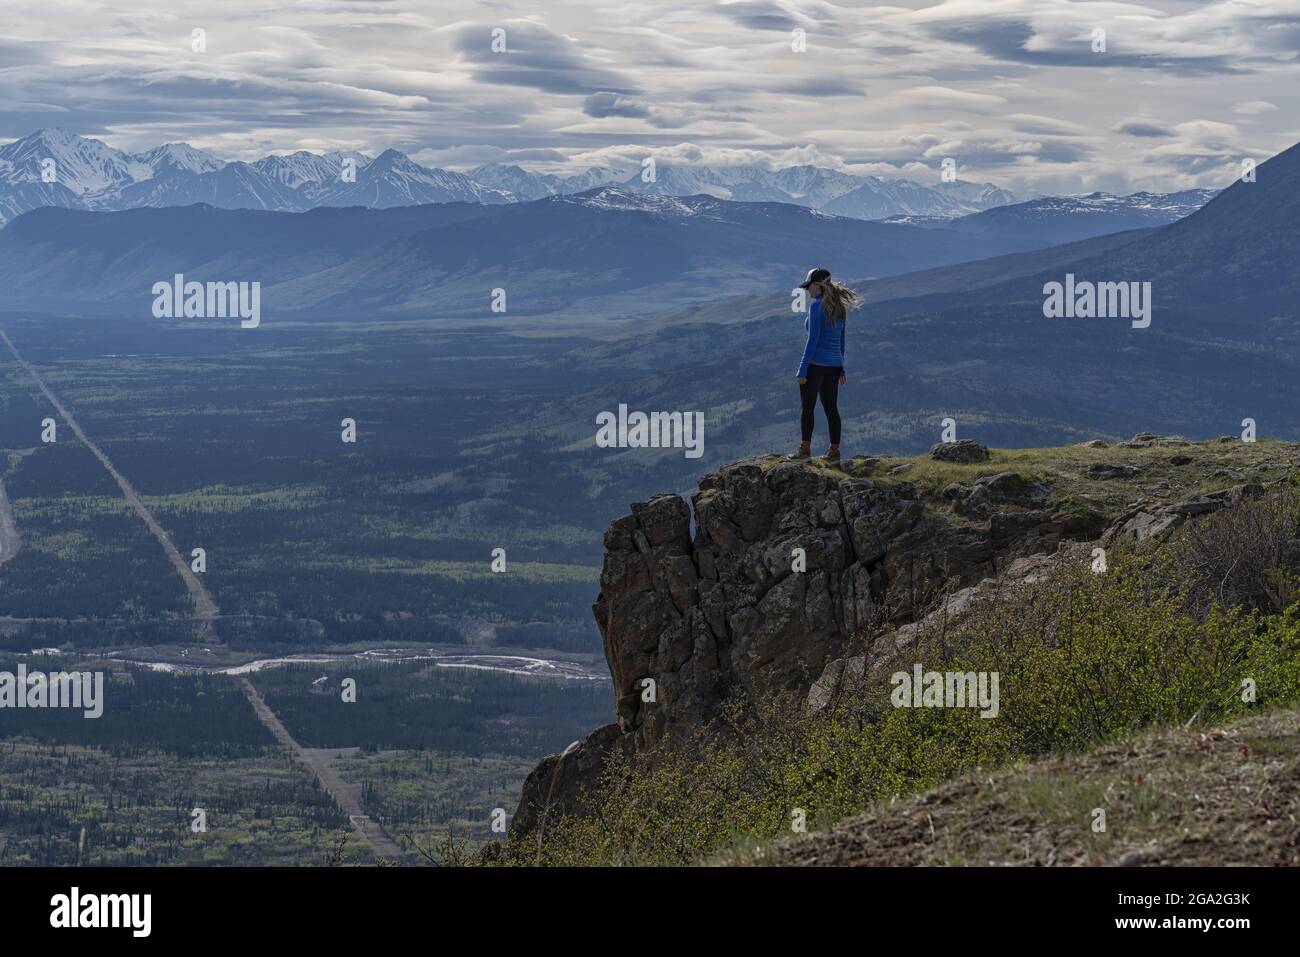 Woman standing on the edge of a mountain cliff looking out at the vista of the majestic mountain ranges and valley below with a cloudy sky on a sun... Stock Photo